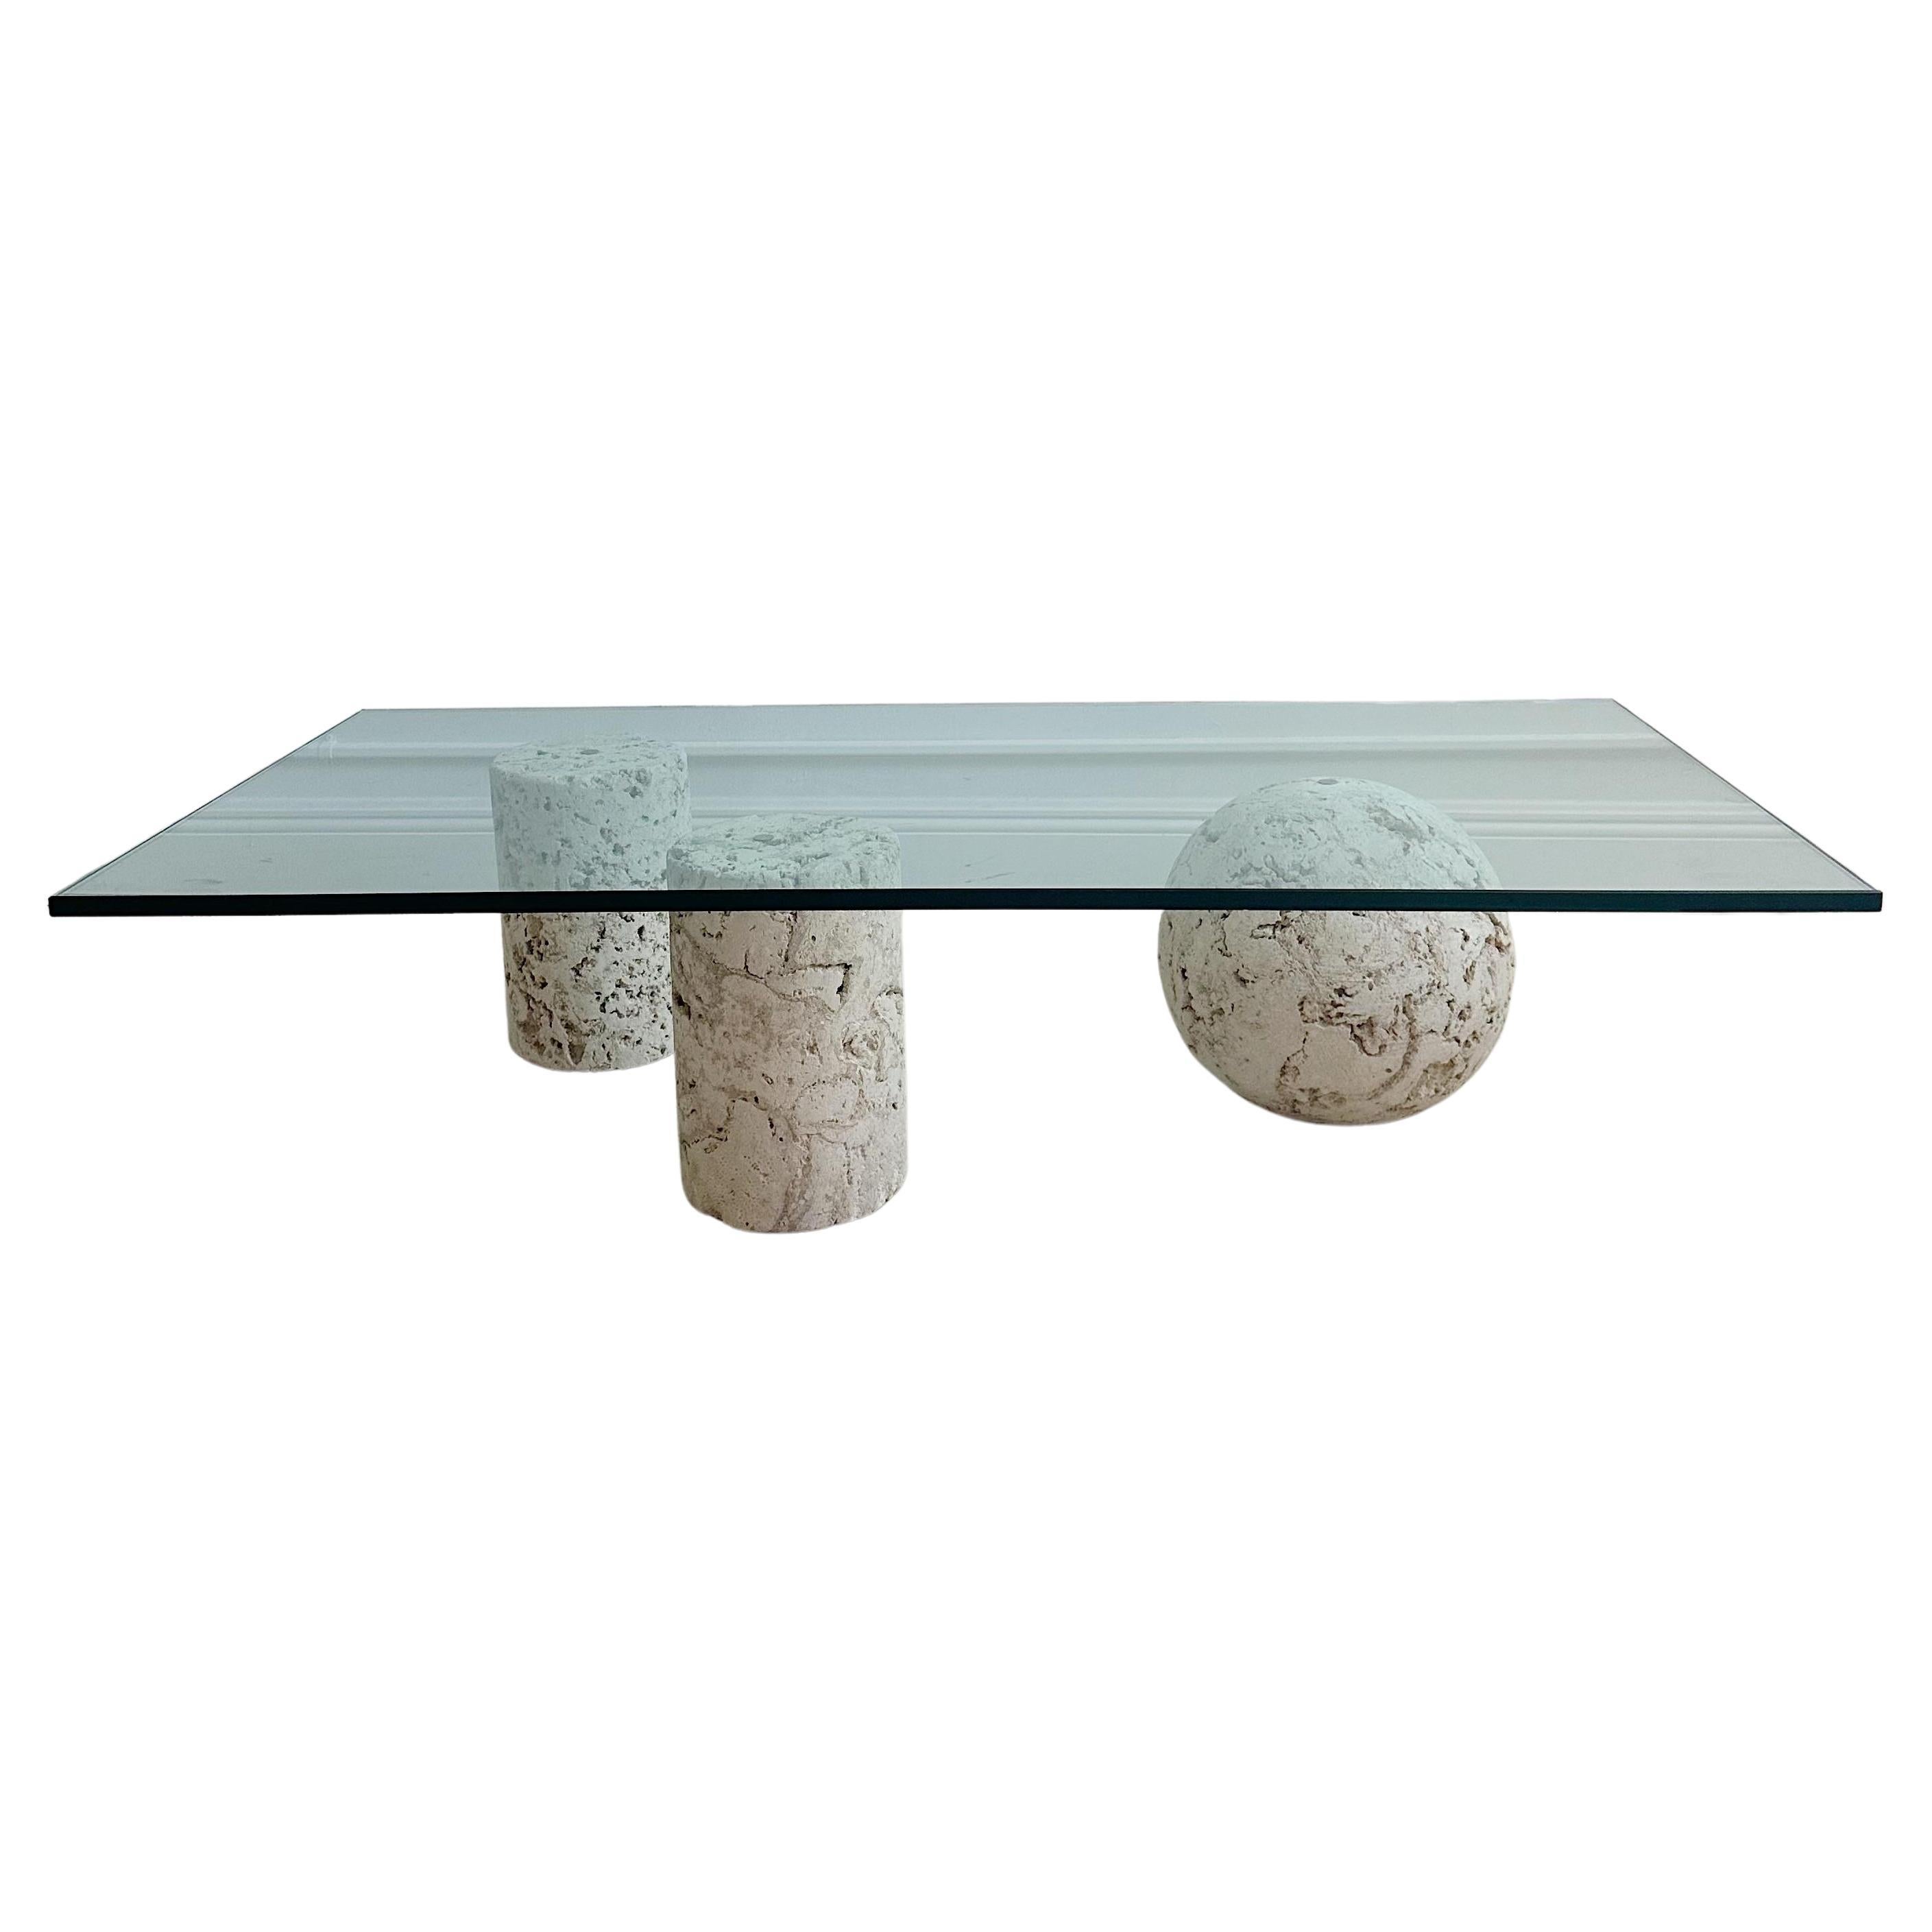 3 Piece Coquina Coral Stone Coffee Table